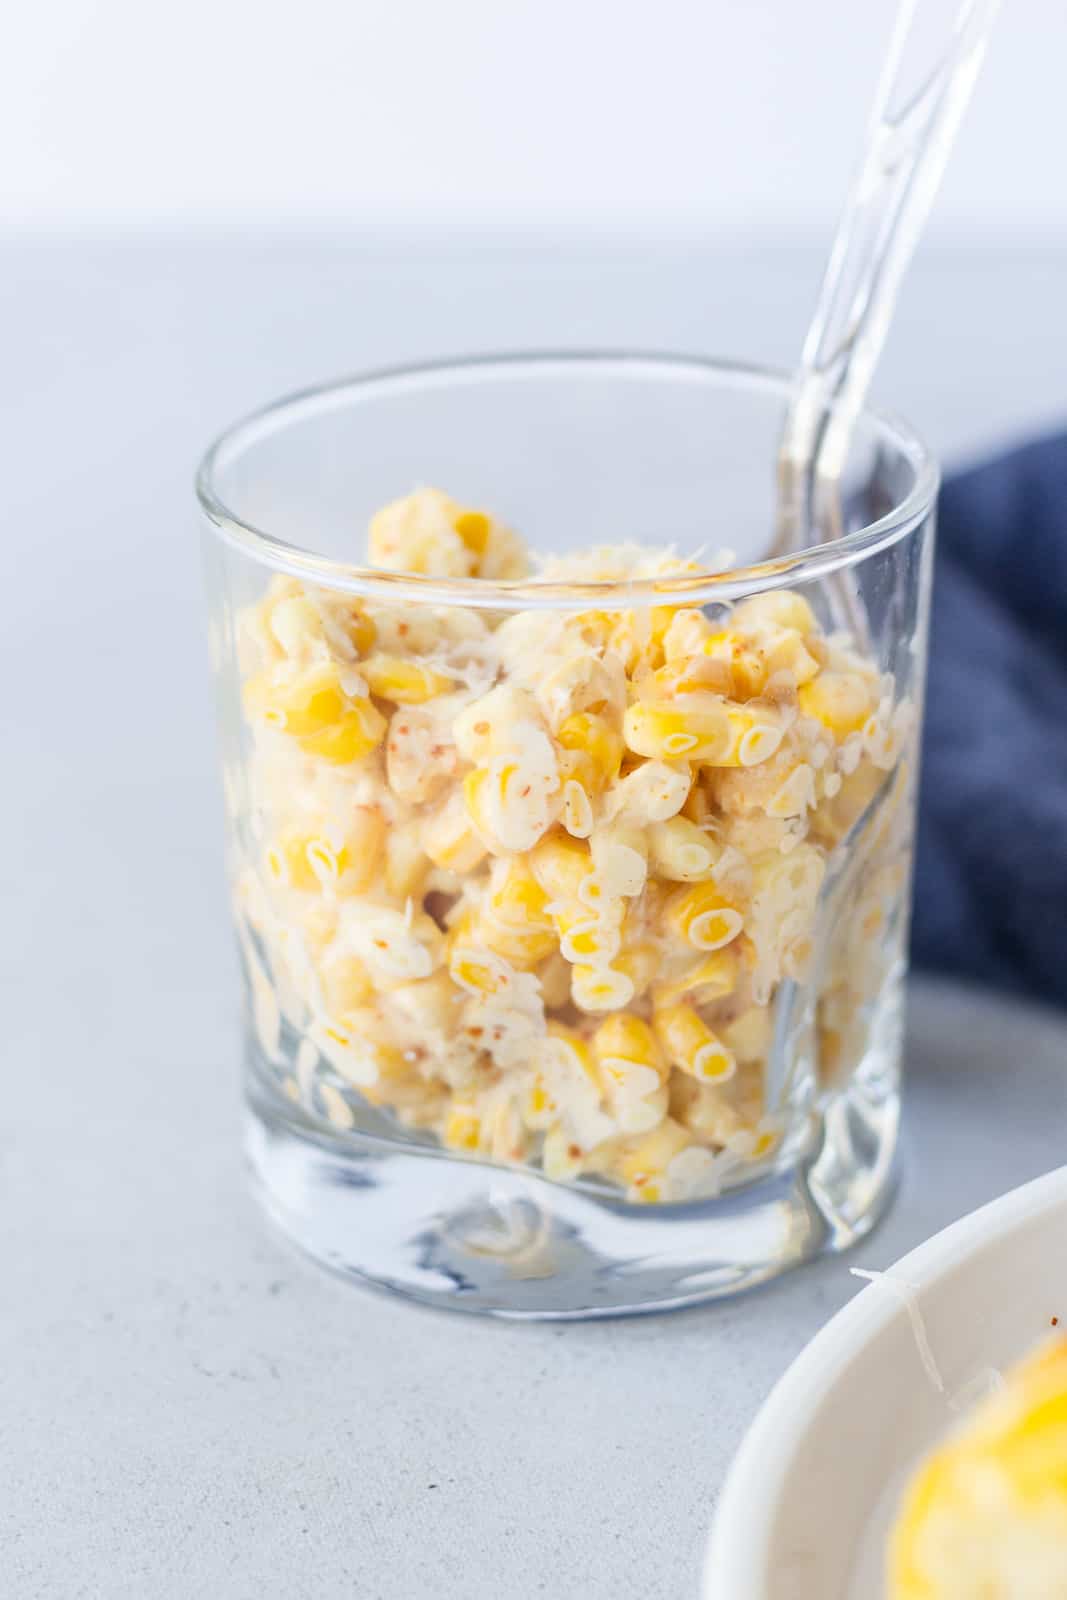 Shaved corn on a glass with a spoon.